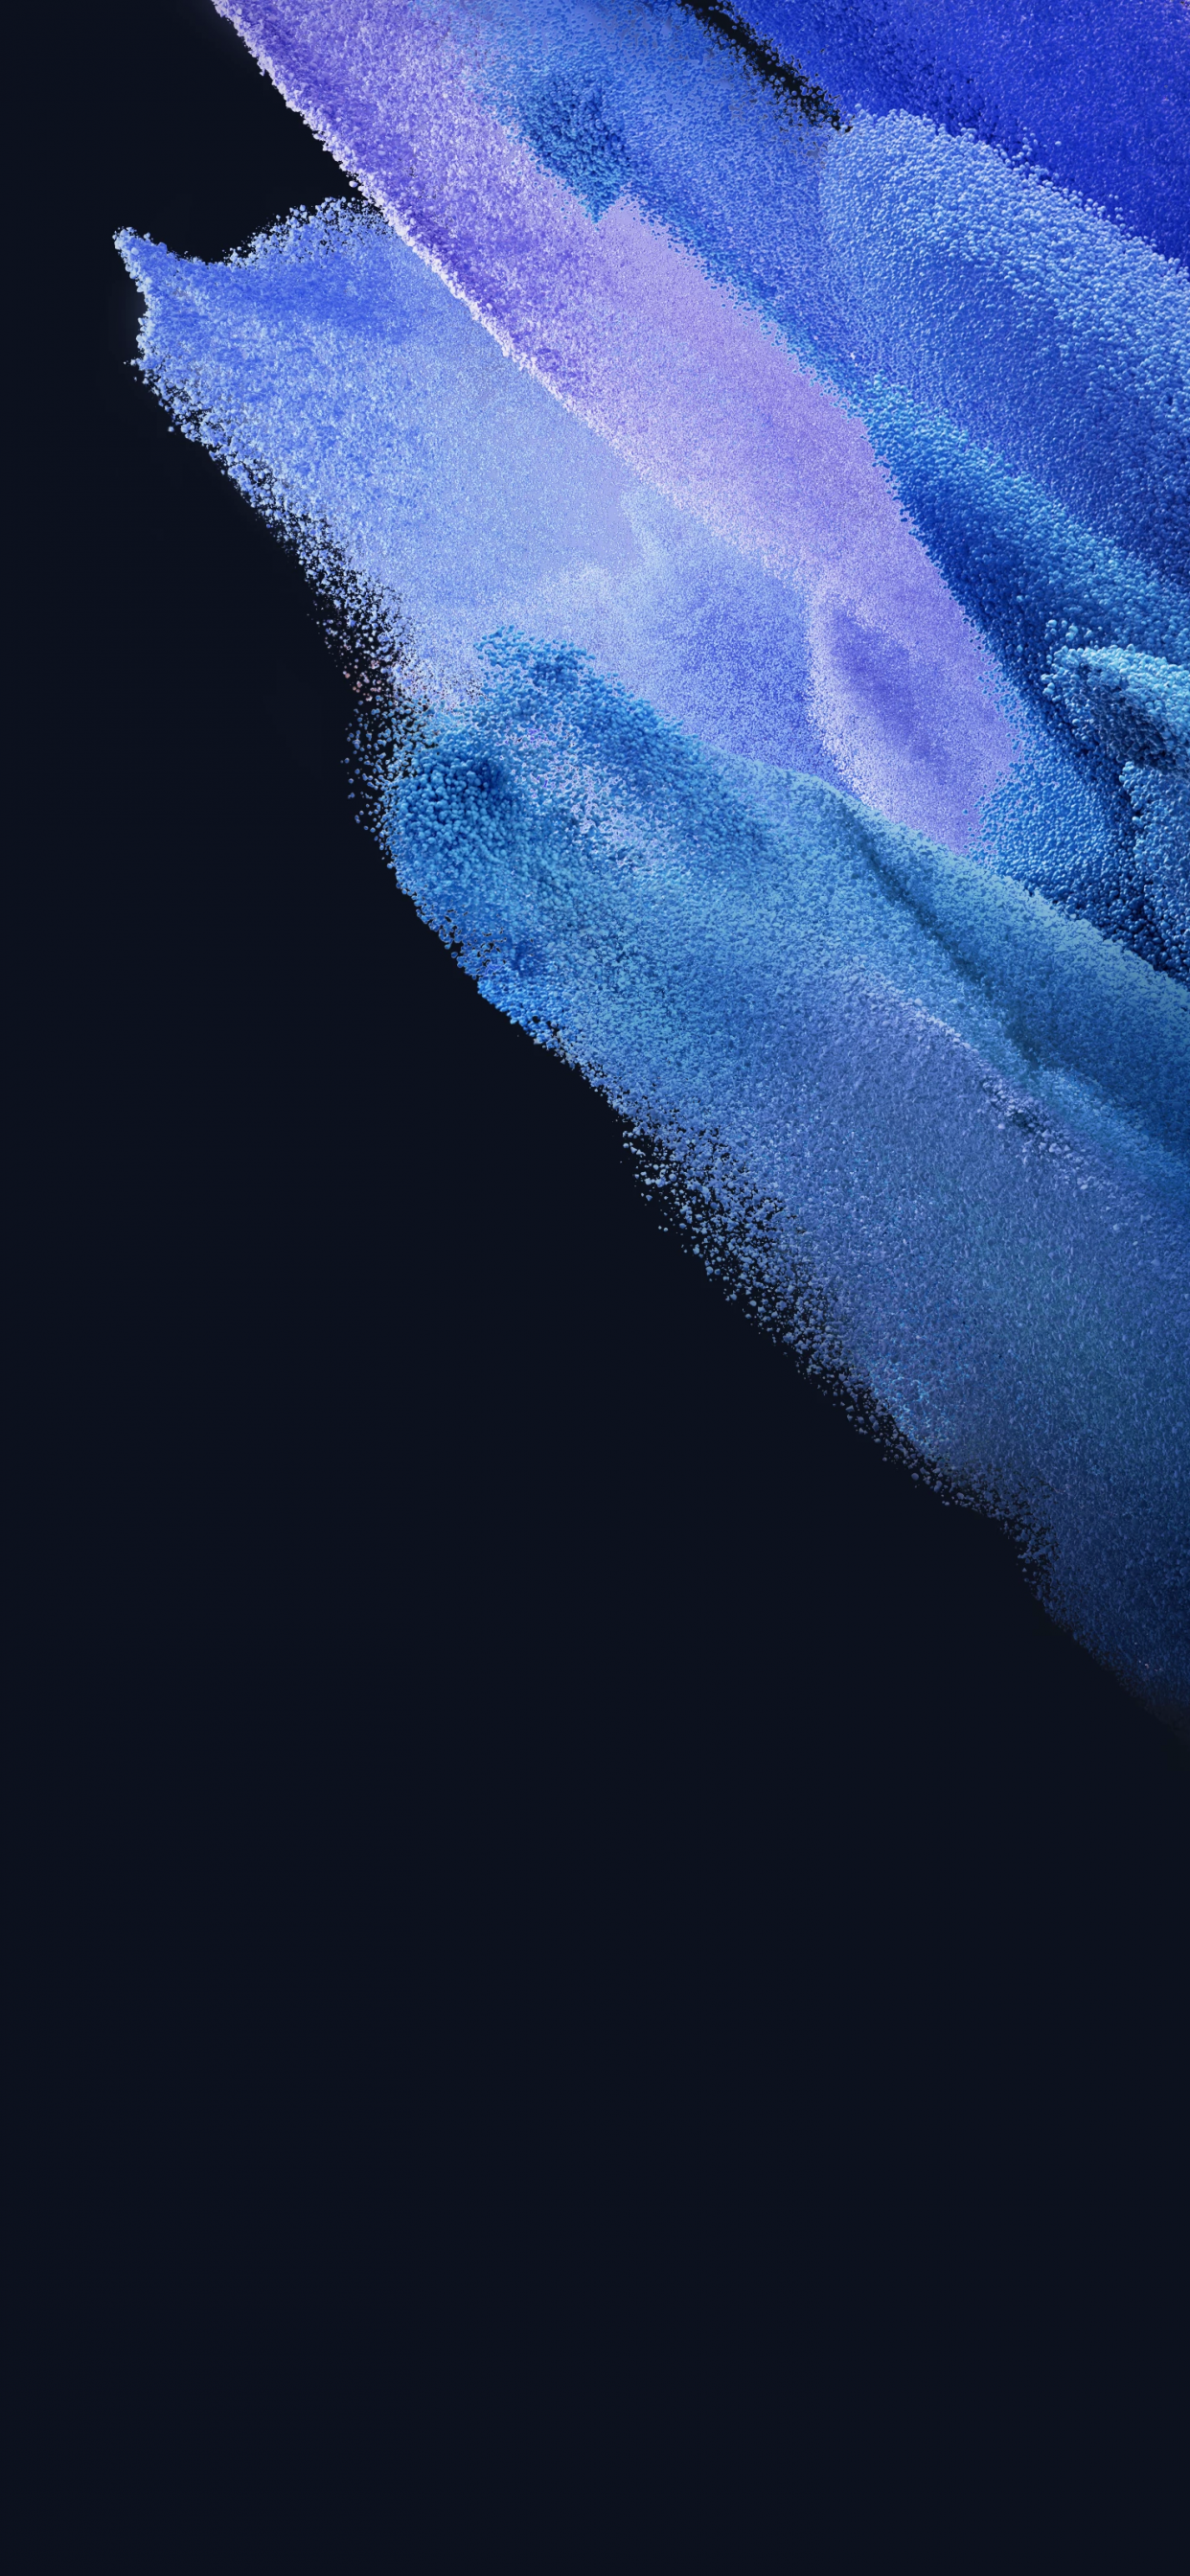 Samsung Galaxy S21 Wallpaper 4K, Stock, AMOLED, Particles, Blue, Black background, Abstract